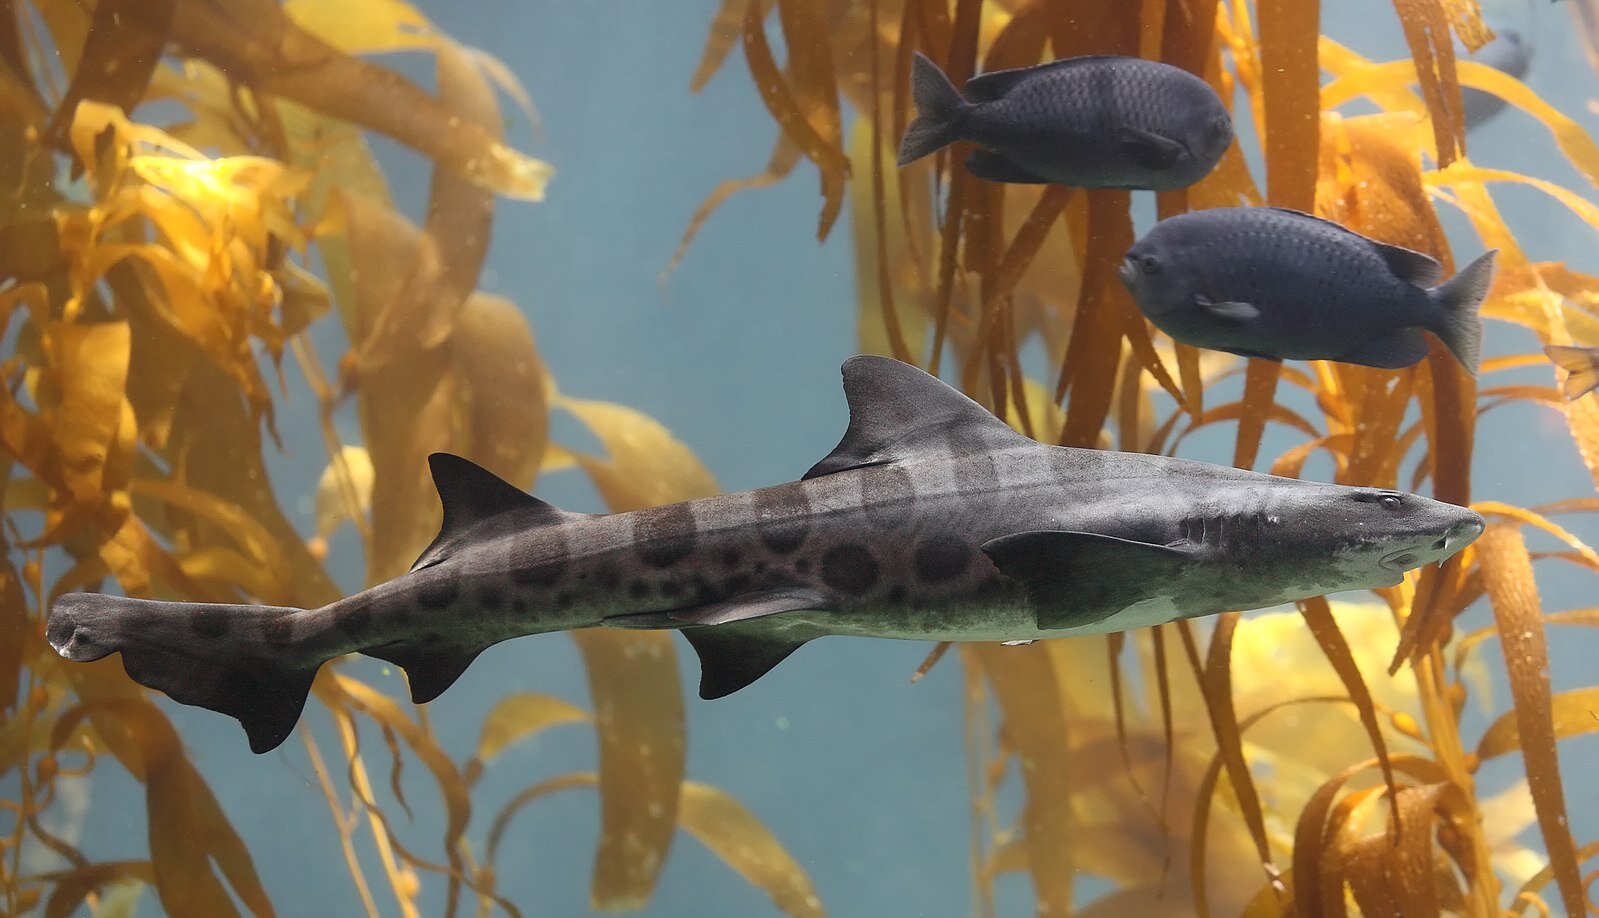 Why do leopard sharks flash their white bellies in Southern California? Student researchers are on the case